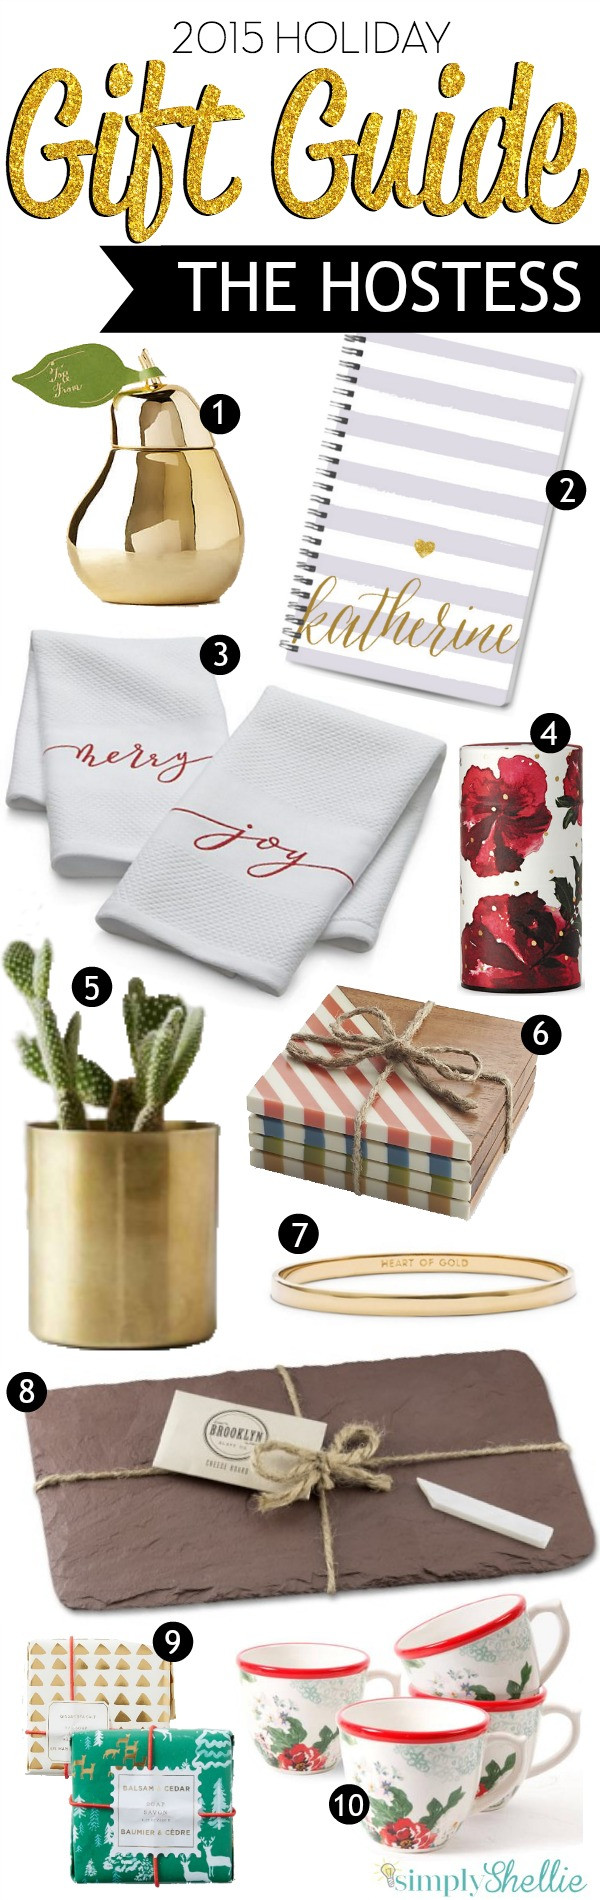 Holiday Party Gift Ideas For The Hostess
 Holiday Gift Guide Fabulous Hostess Gift Ideas